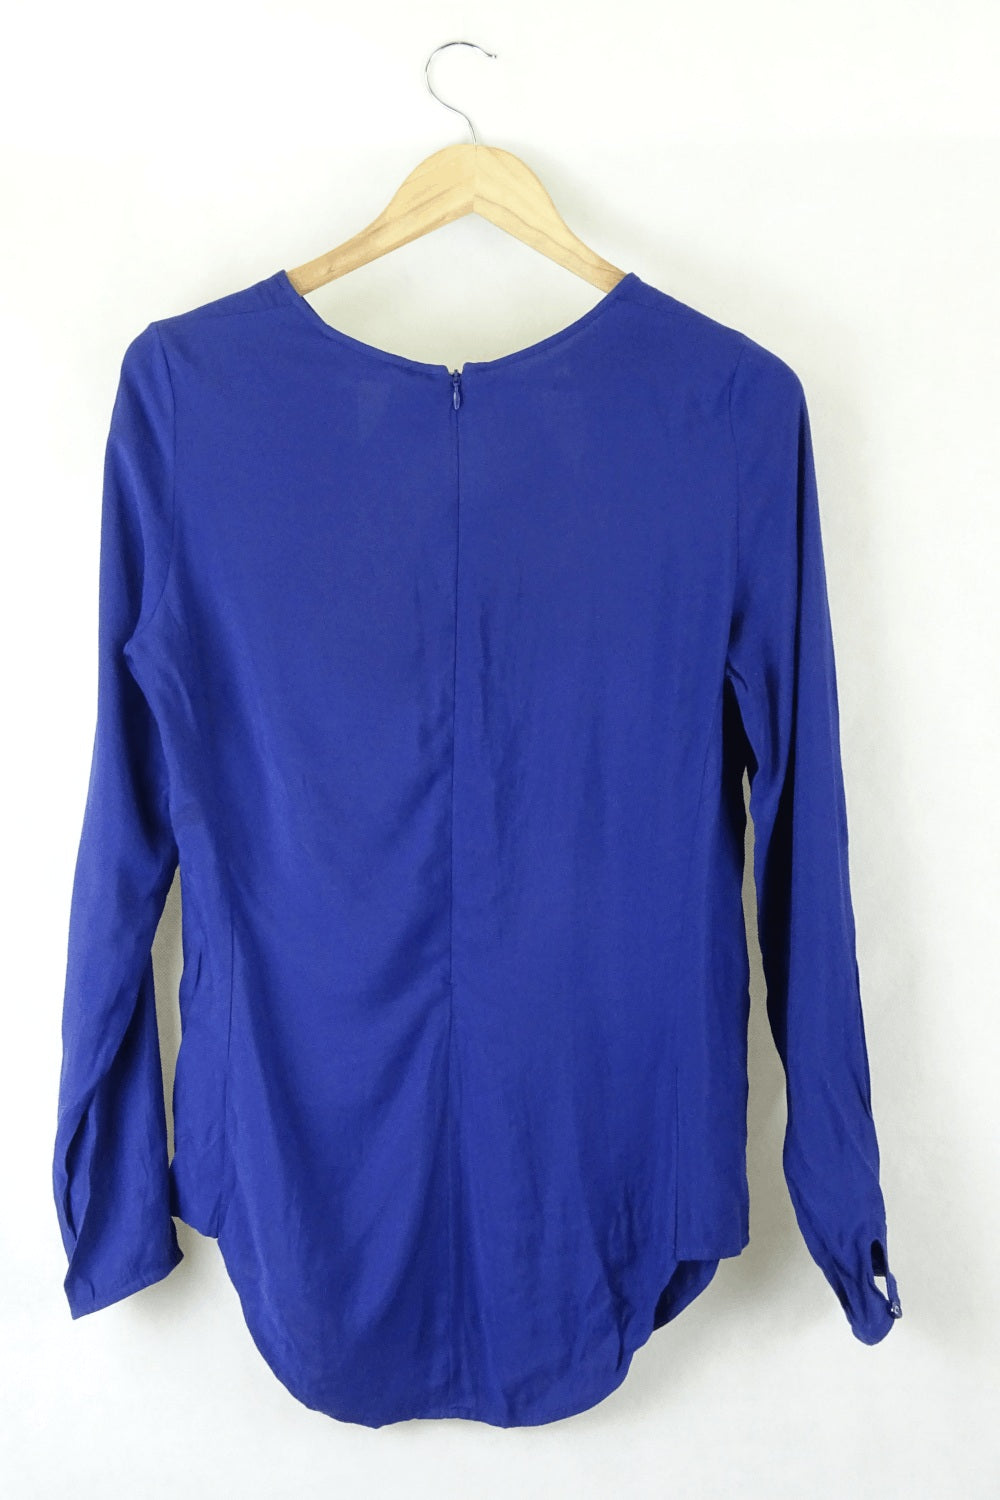 Veronika Maine Blue Long Sleeve Fitted Top 10